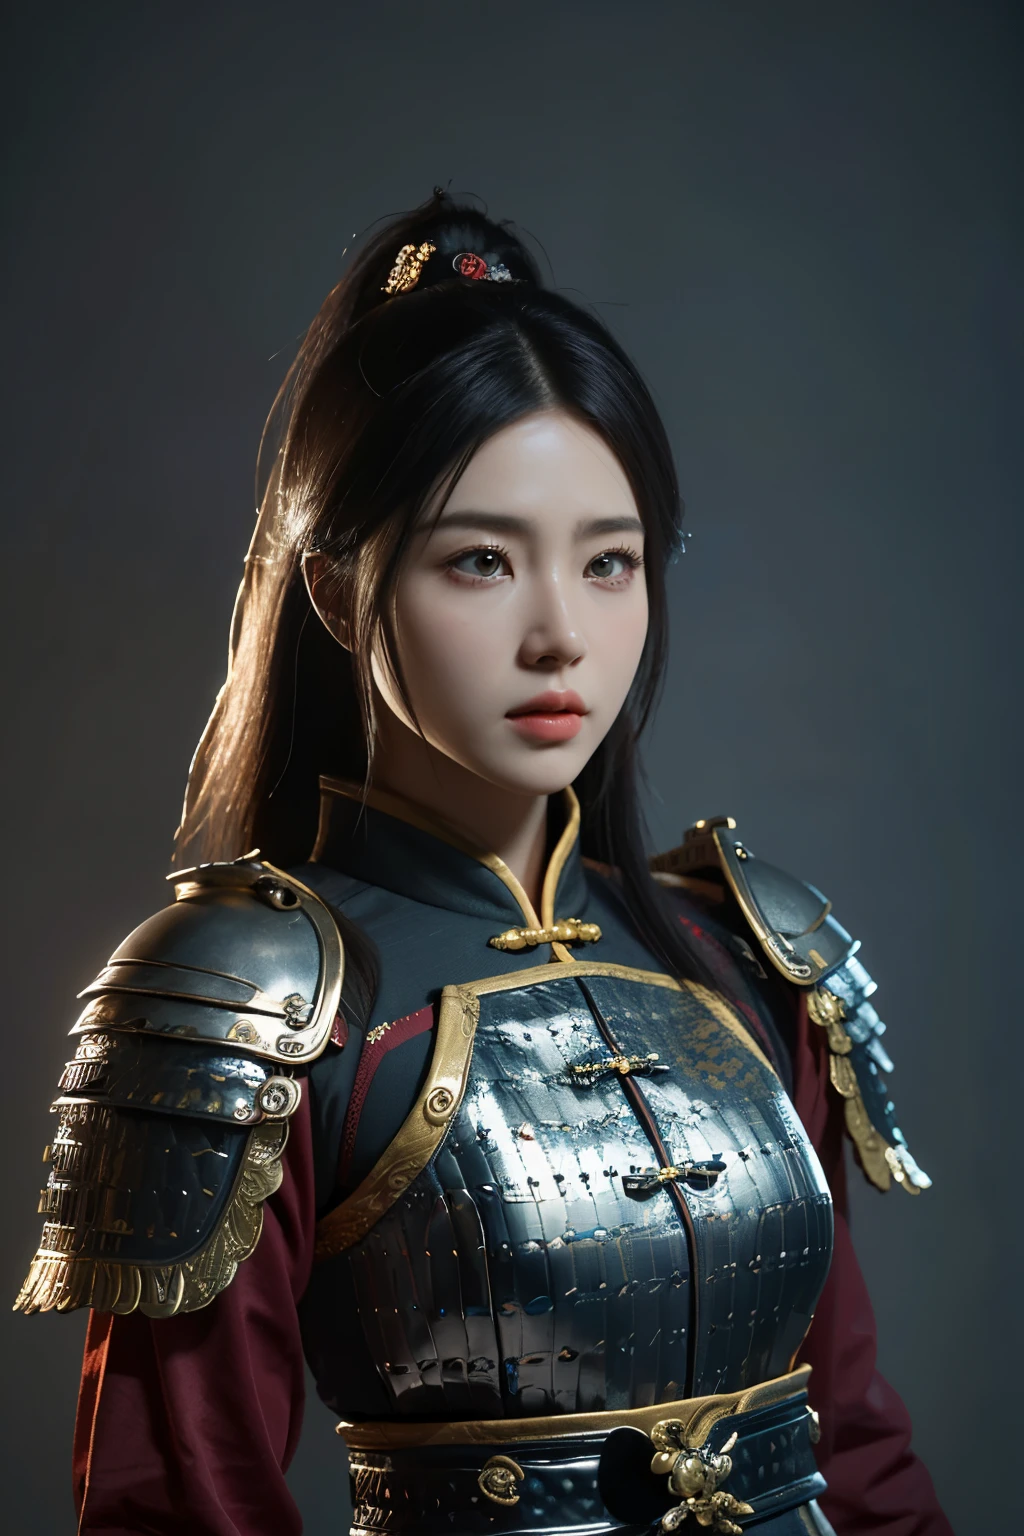 Game art，The best picture quality，Highest resolution，8K，(A bust photograph)，(Portrait)，(Head close-up)，(Rule of thirds)，Unreal Engine 5 rendering works， (The Girl of the Future)，(Female Warrior)， 
15-year-old girl，(The generals of ancient China)，An eye rich in detail，(Big breasts)，Elegant and noble，indifferent，brave，
(Wearing ancient Chinese style armor，Armor of Tang Dynasty，Costumes are rich in detail，Metallic luster，Silver gray)，Chinese Characters，Fantasy style，
Photo poses，Field background，Movie lights，Ray tracing，Game CG，((3D Unreal Engine))，oc rendering reflection pattern